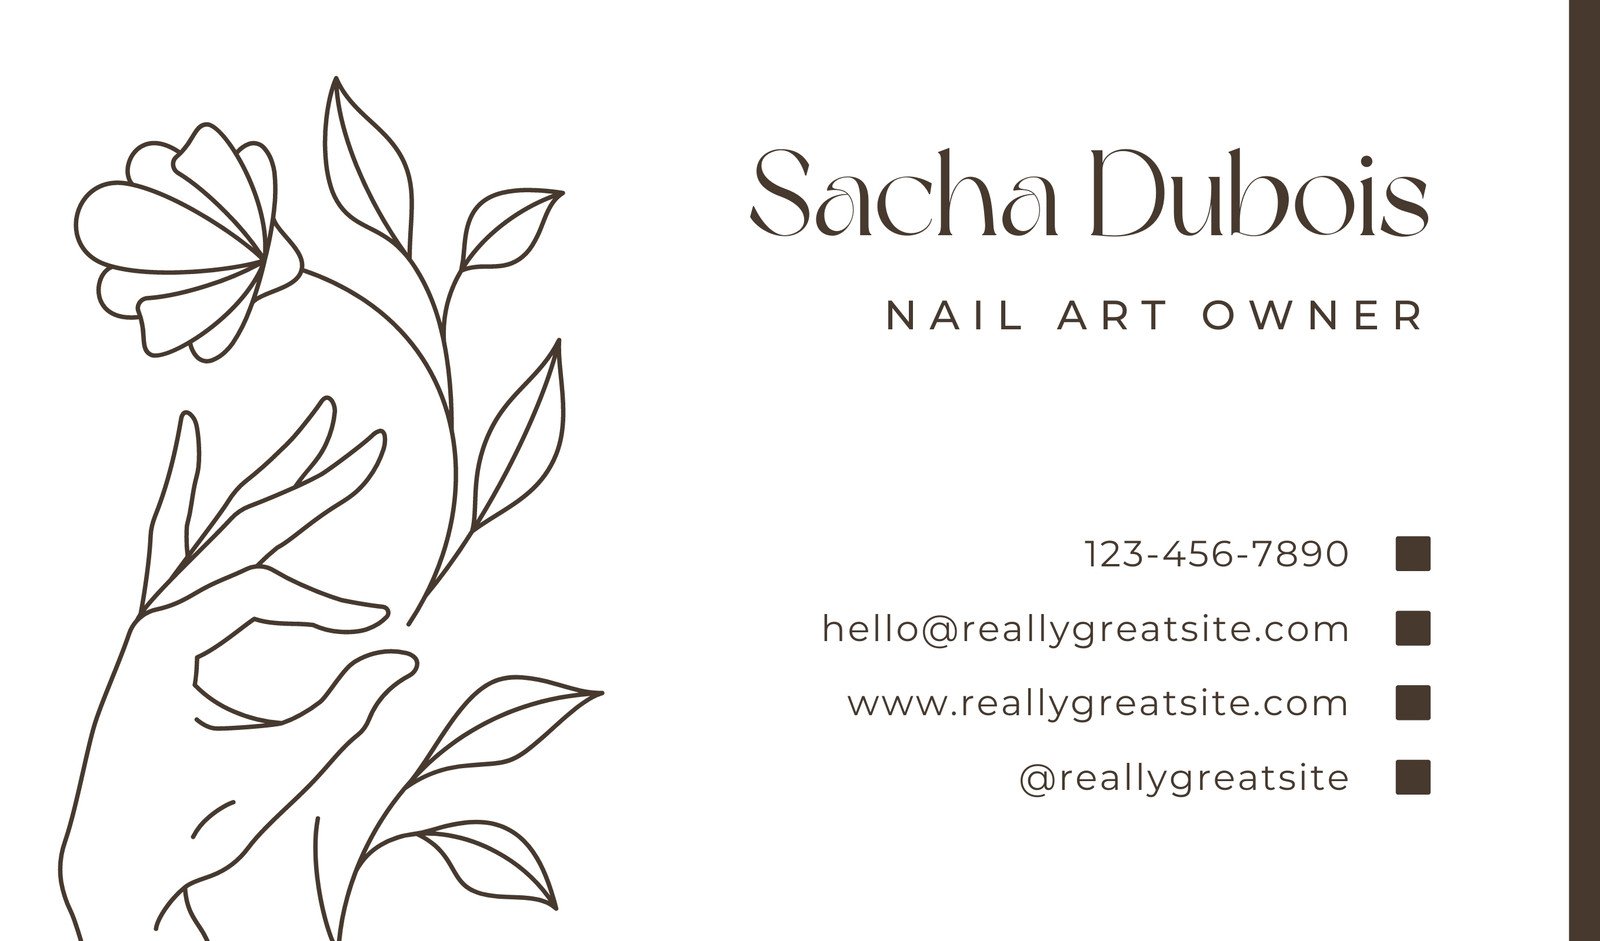 5. Elegant Business Card Designs for Nail Technicians - wide 1